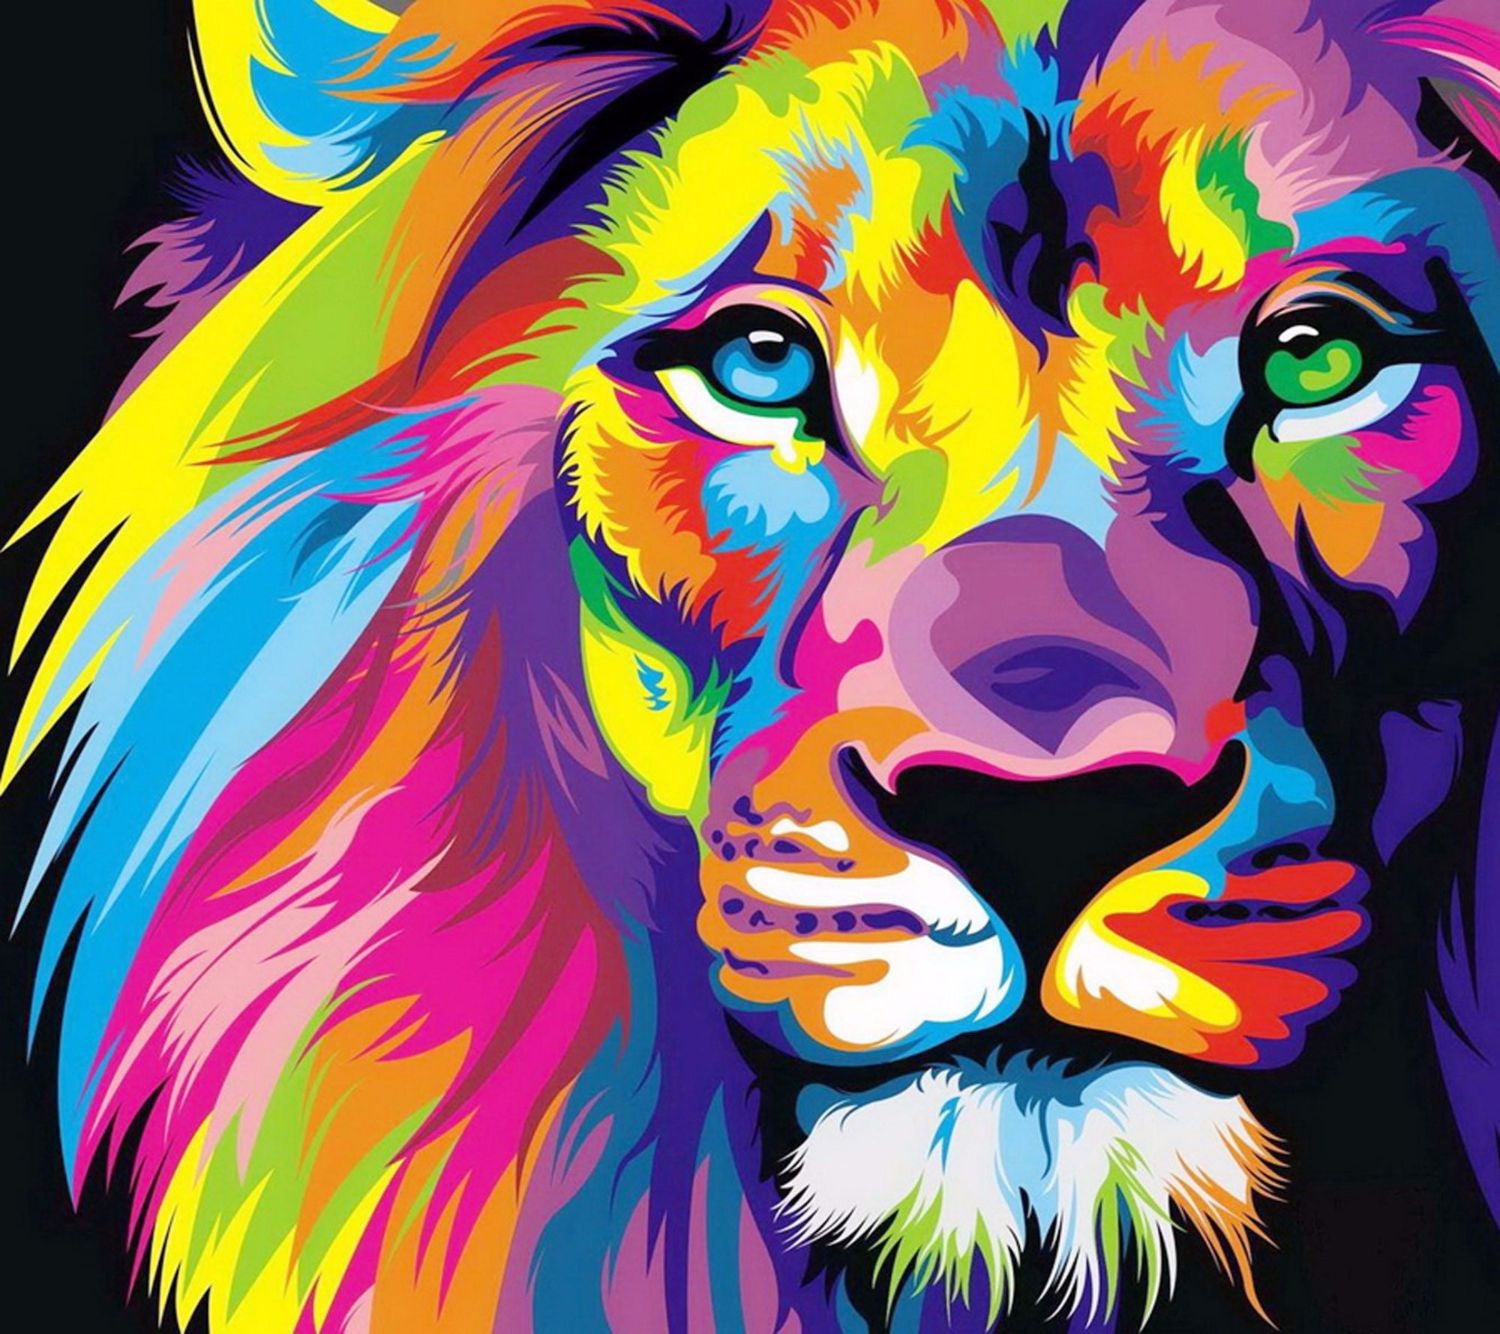 Majestic Lion - Art by George Joseph | Buy Posters, Canvas & Digital Art Prints | Small, Compact, Medium and Large Variants